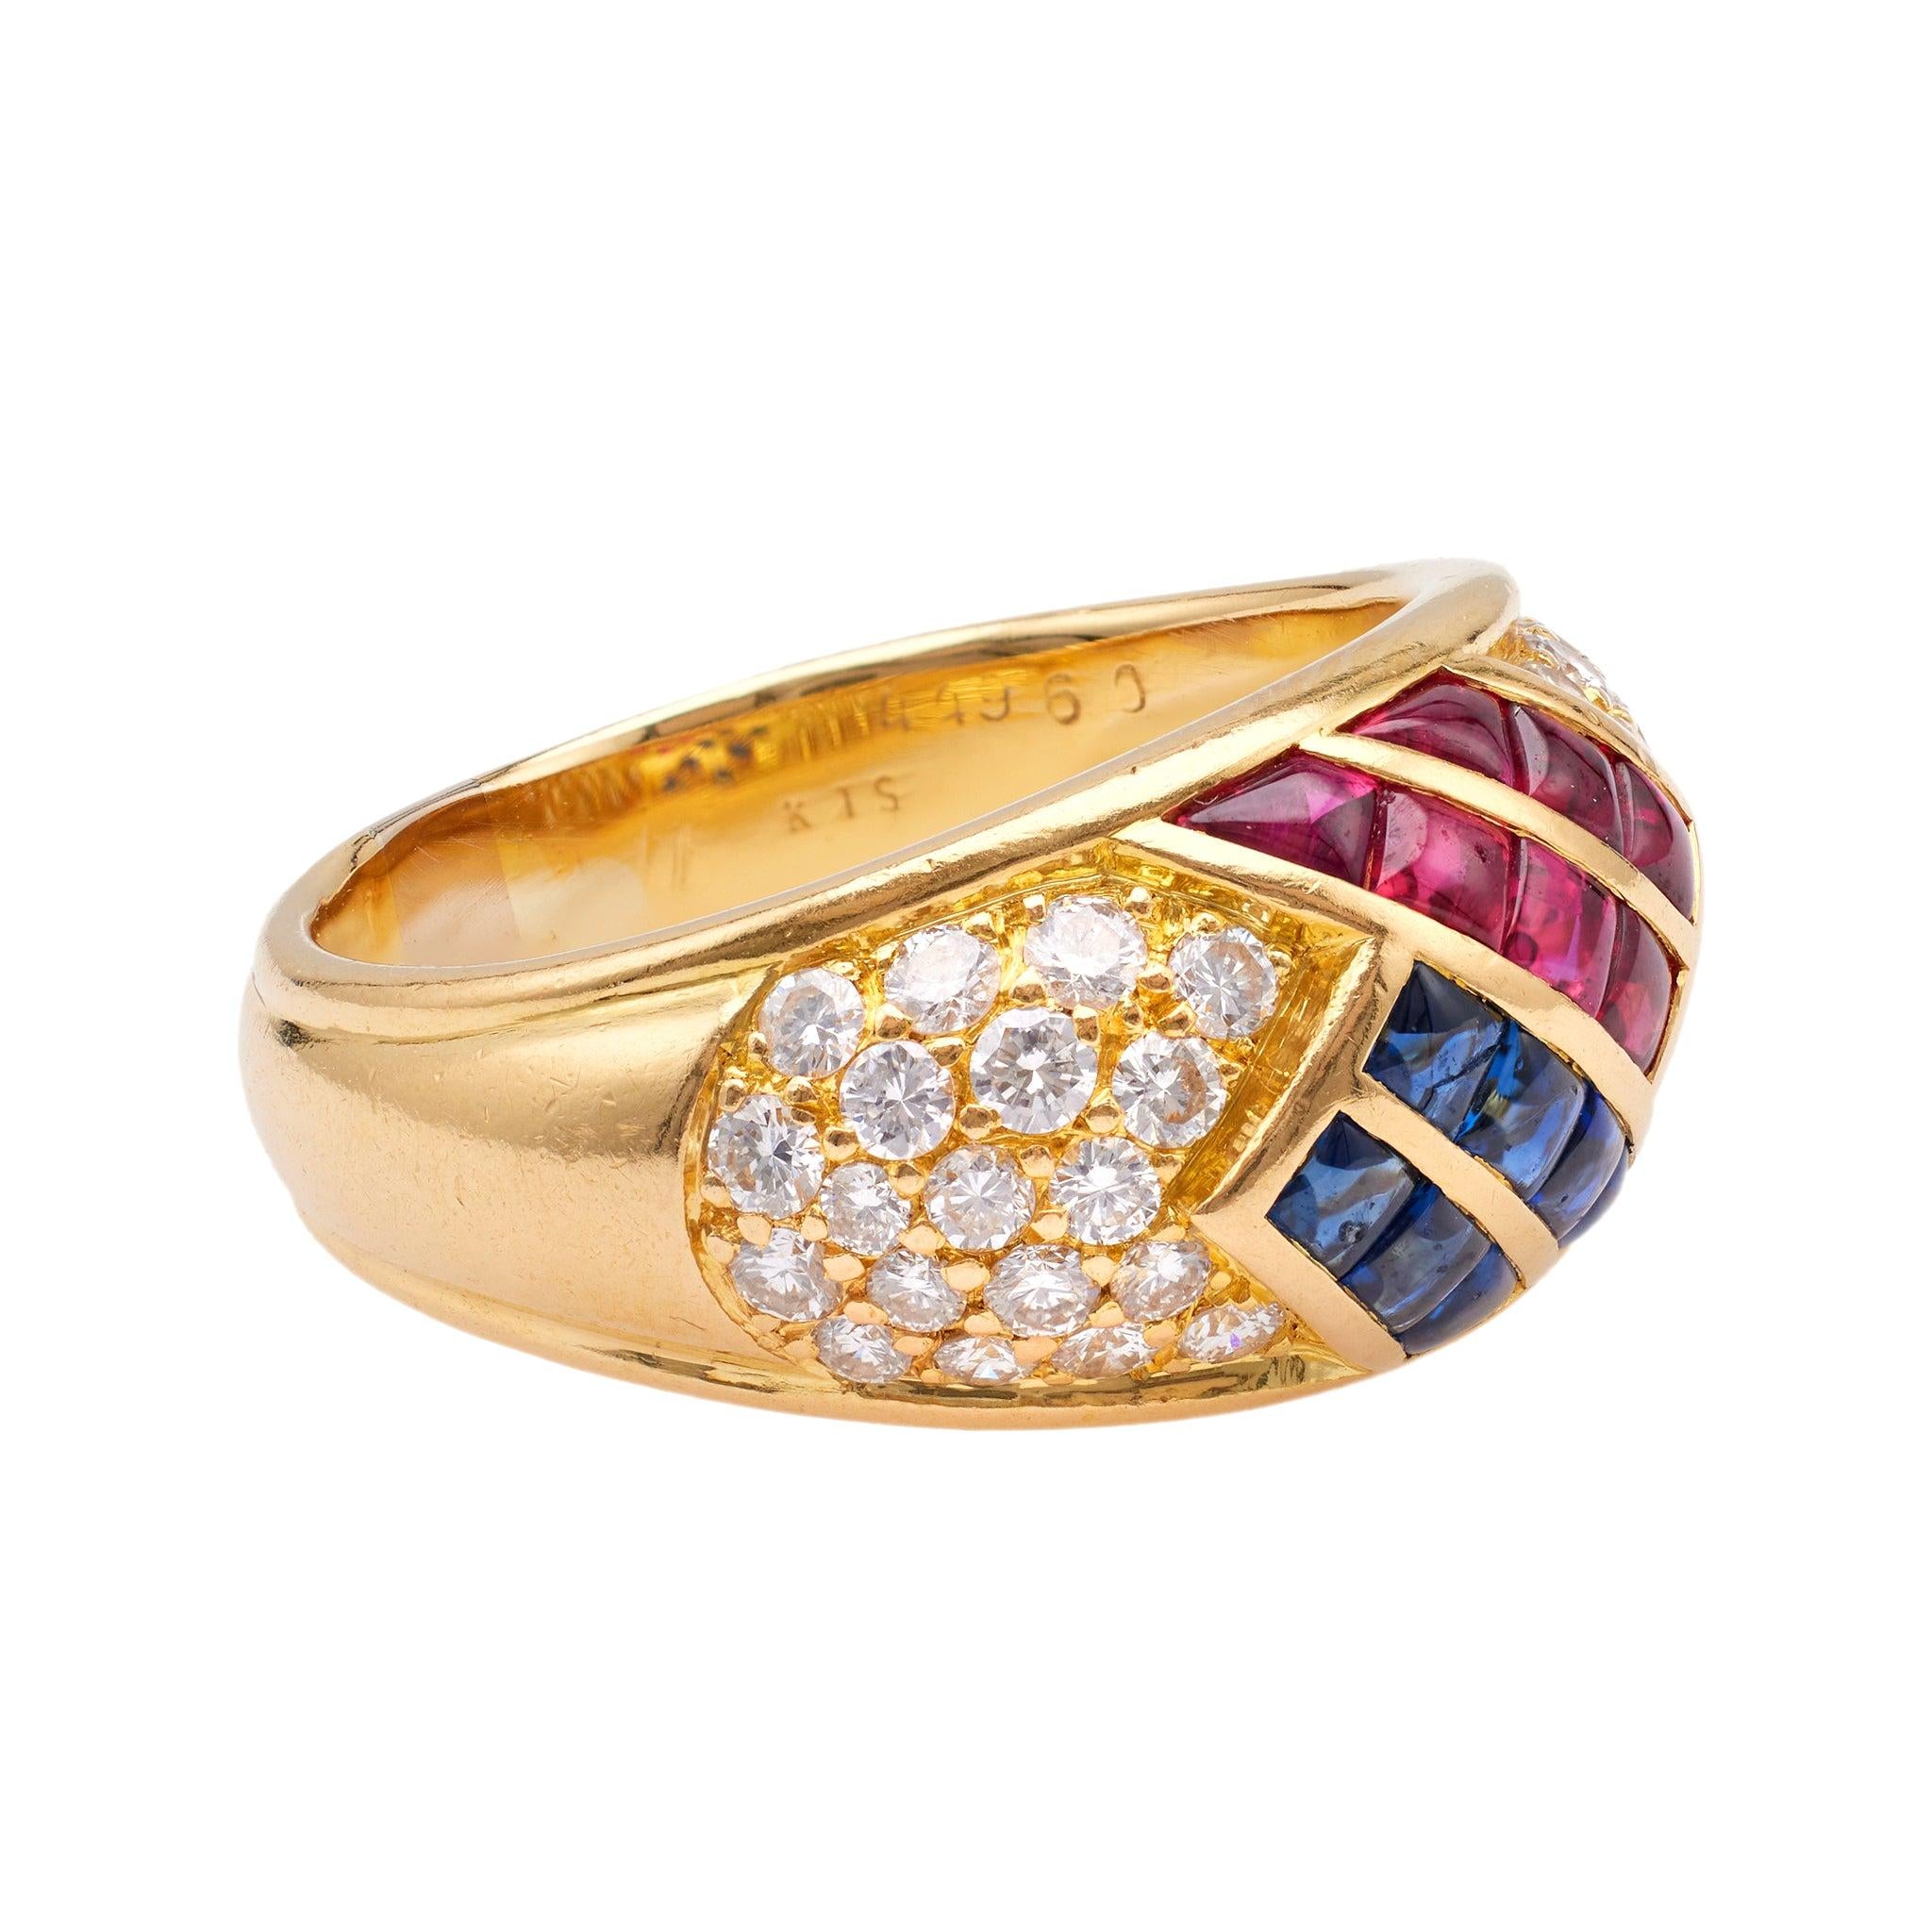 Vintage Mauboussin French Ruby, Sapphire, and Diamond 18k Yellow Gold Dome Ring  Mauboussin   